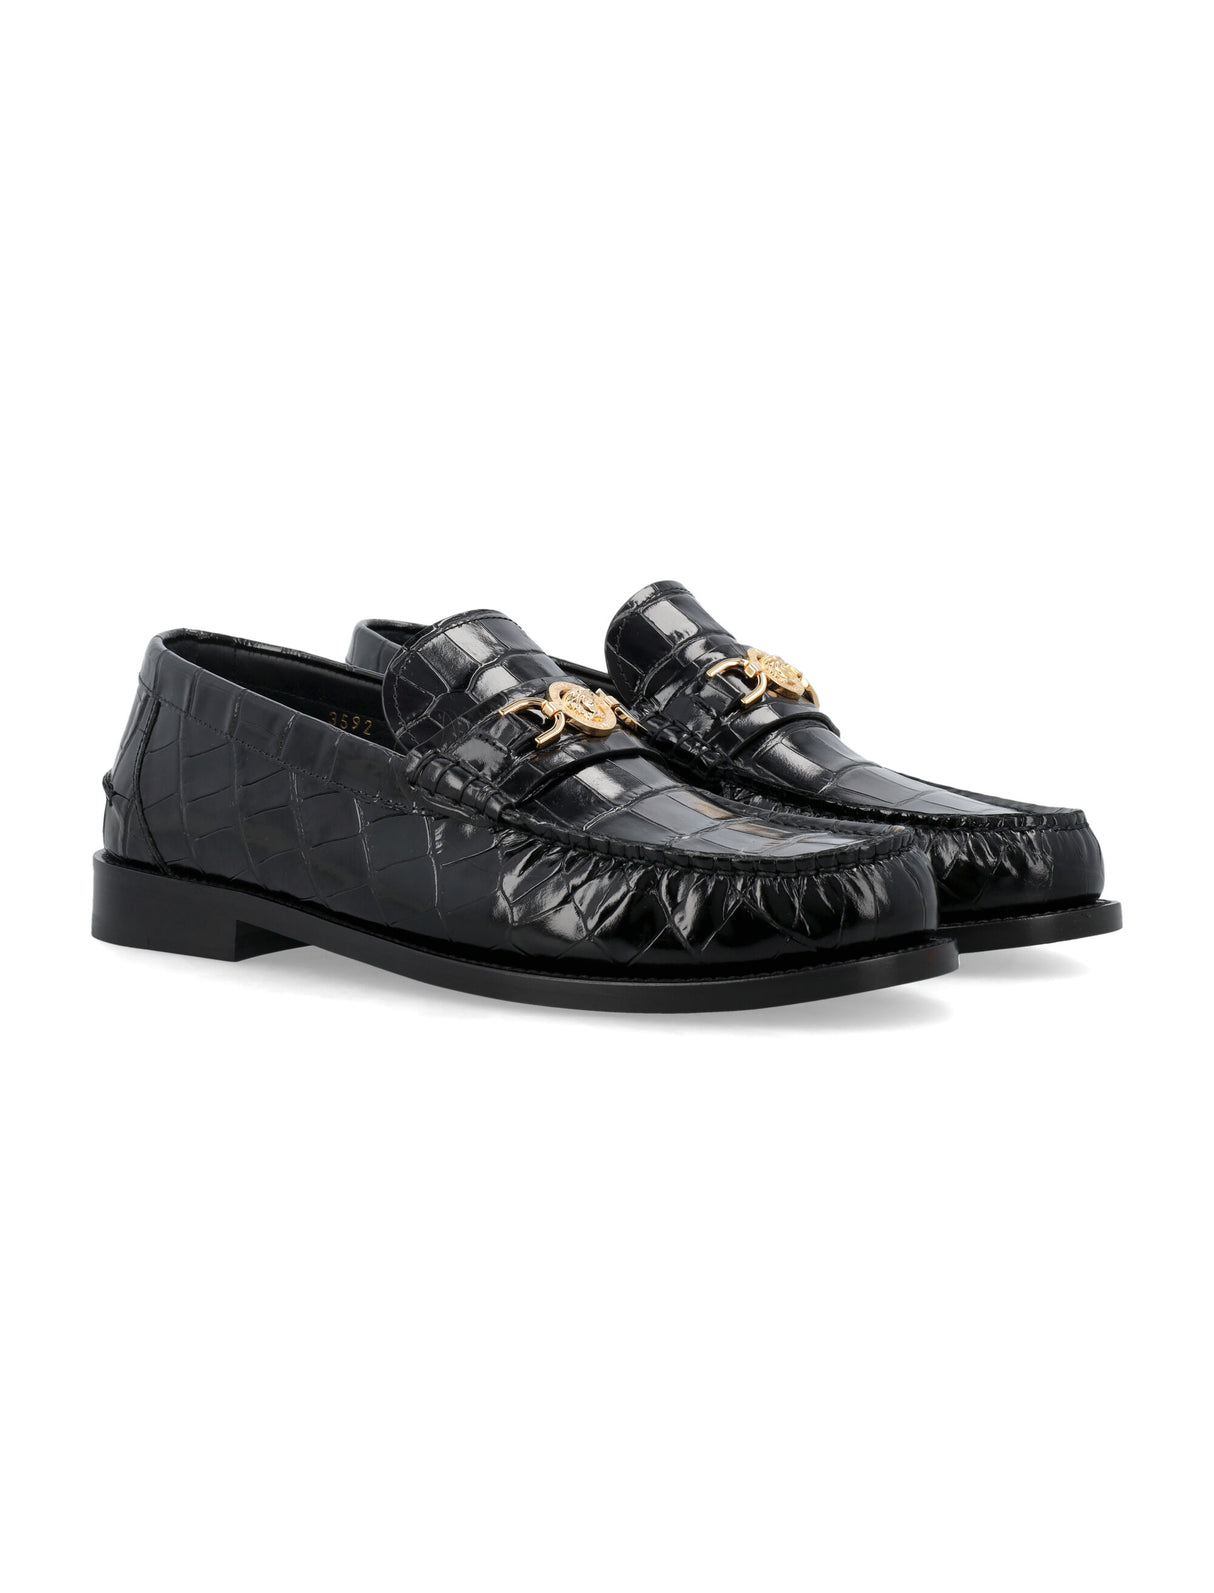 VERSACE LOAFER COIN CROCCO PRINT